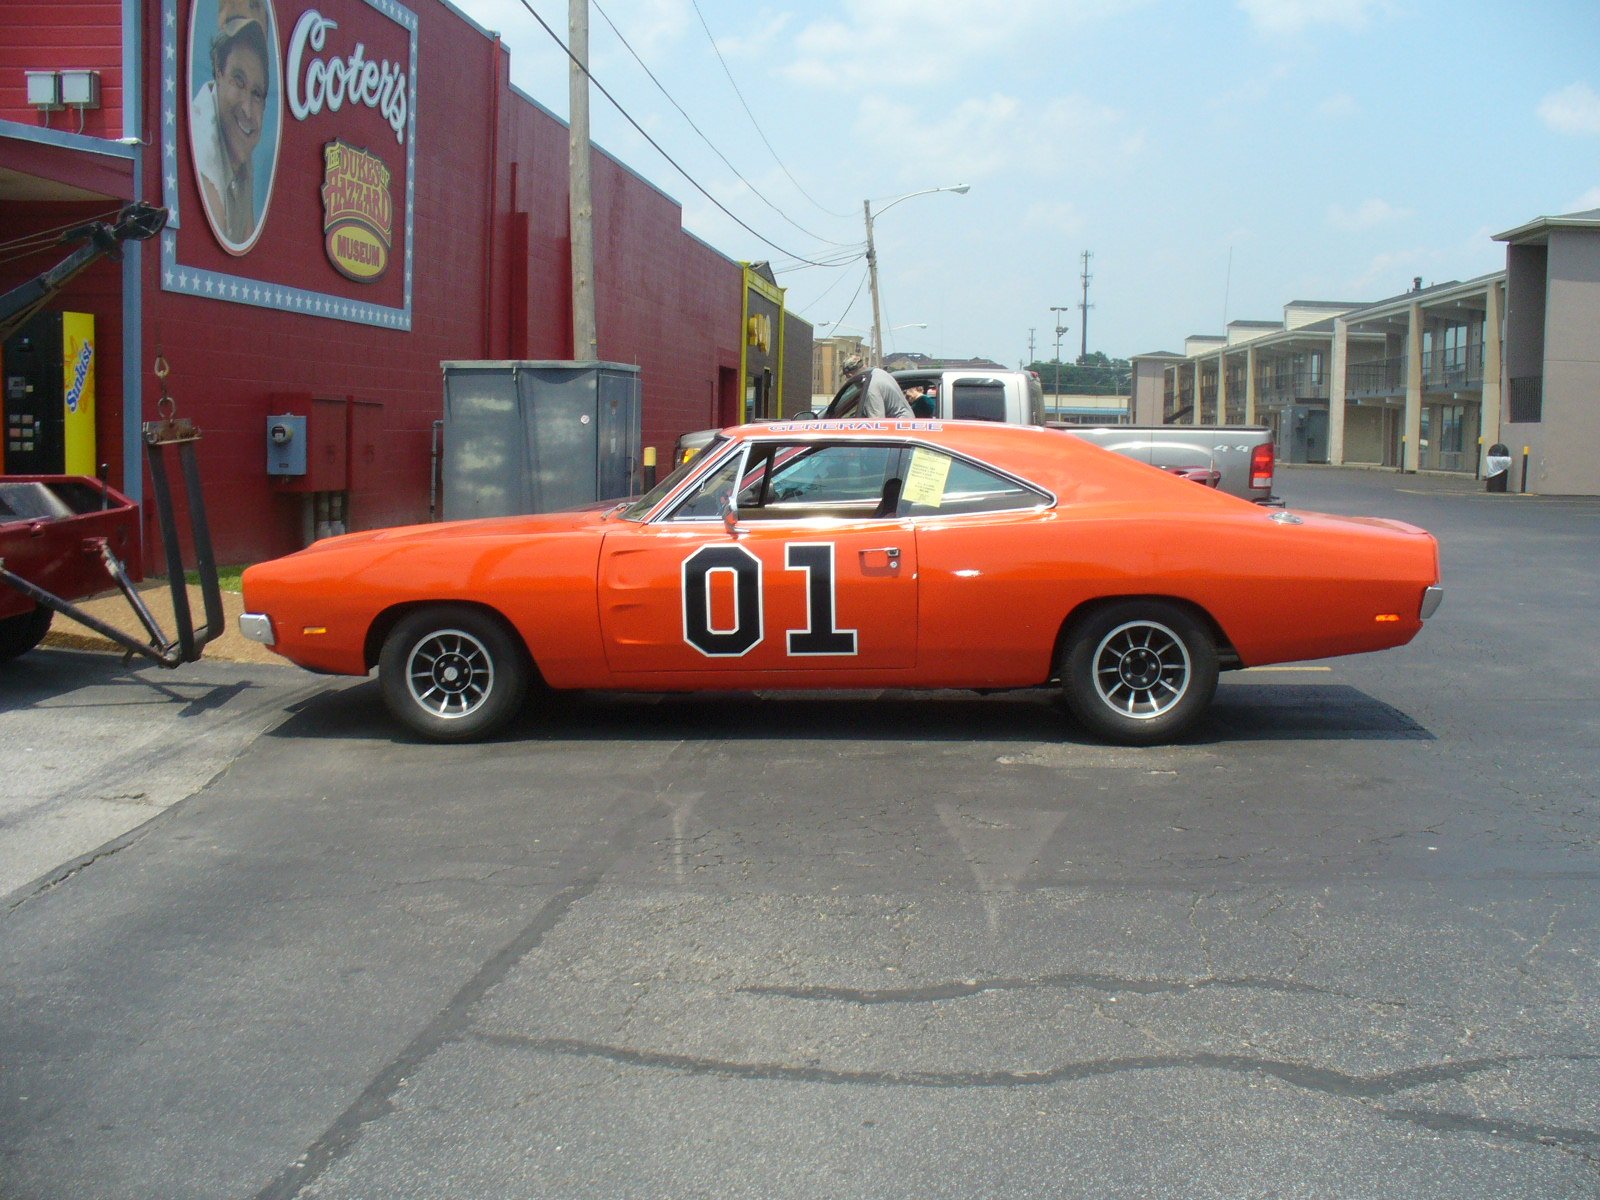 General Lee Dukes Hazzard Dodge Charger Muscle Hot Rod Rods Television